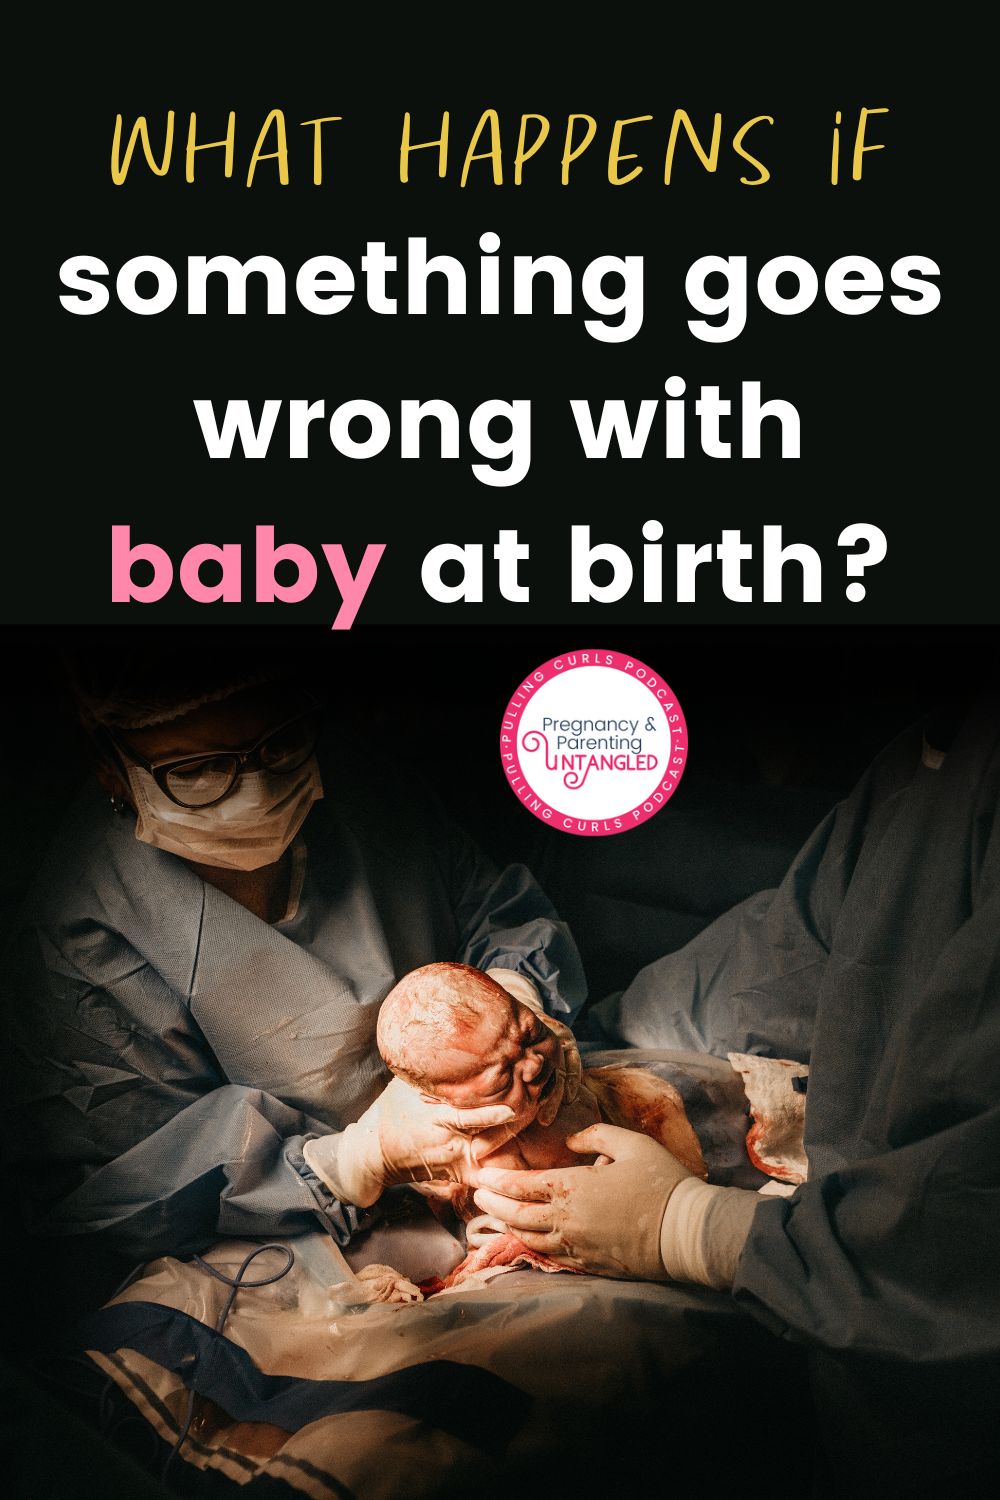 When something goes wrong with a baby at birth, it can be a traumatic event for the parents involved. The fear of the unknown and the worry of what will happen to their newborn can be overwhelming. However, medical professionals are trained to deal with medical emergencies and can provide parents with the support and reassurance they need to get through this difficult time. via @pullingcurls